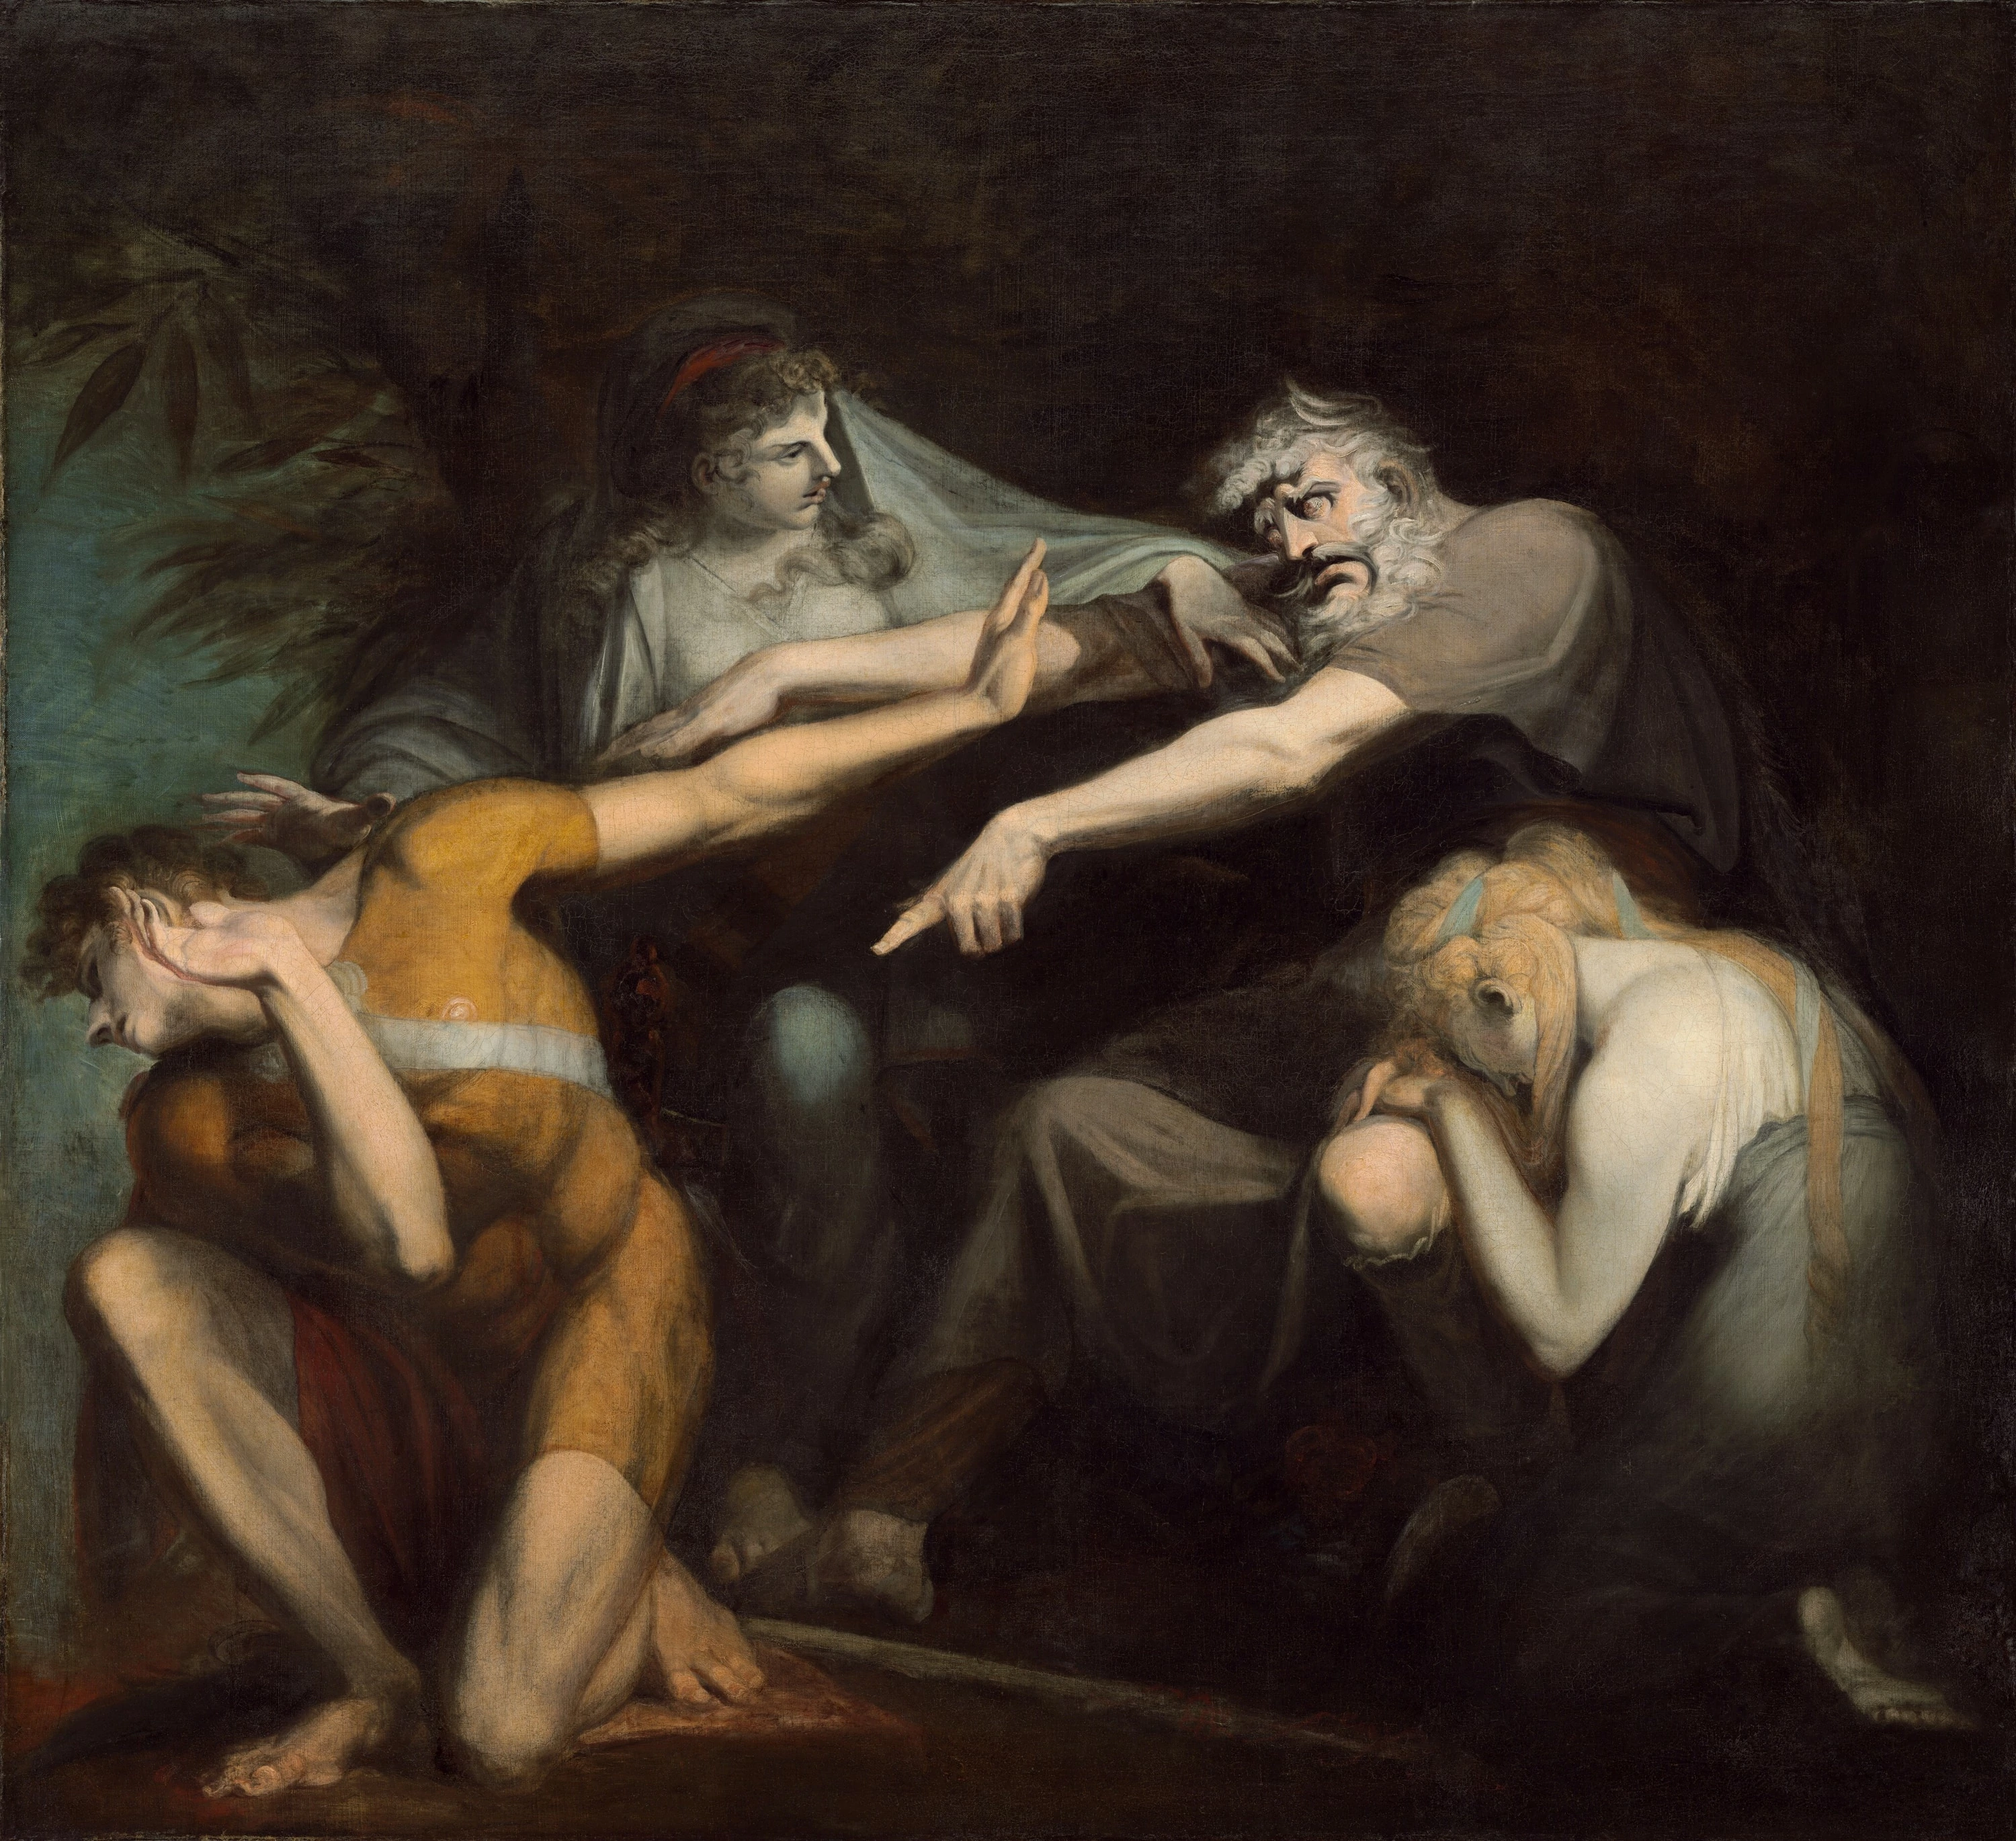 Oedipus Cursing His Son Polynices, Henry Fuseli